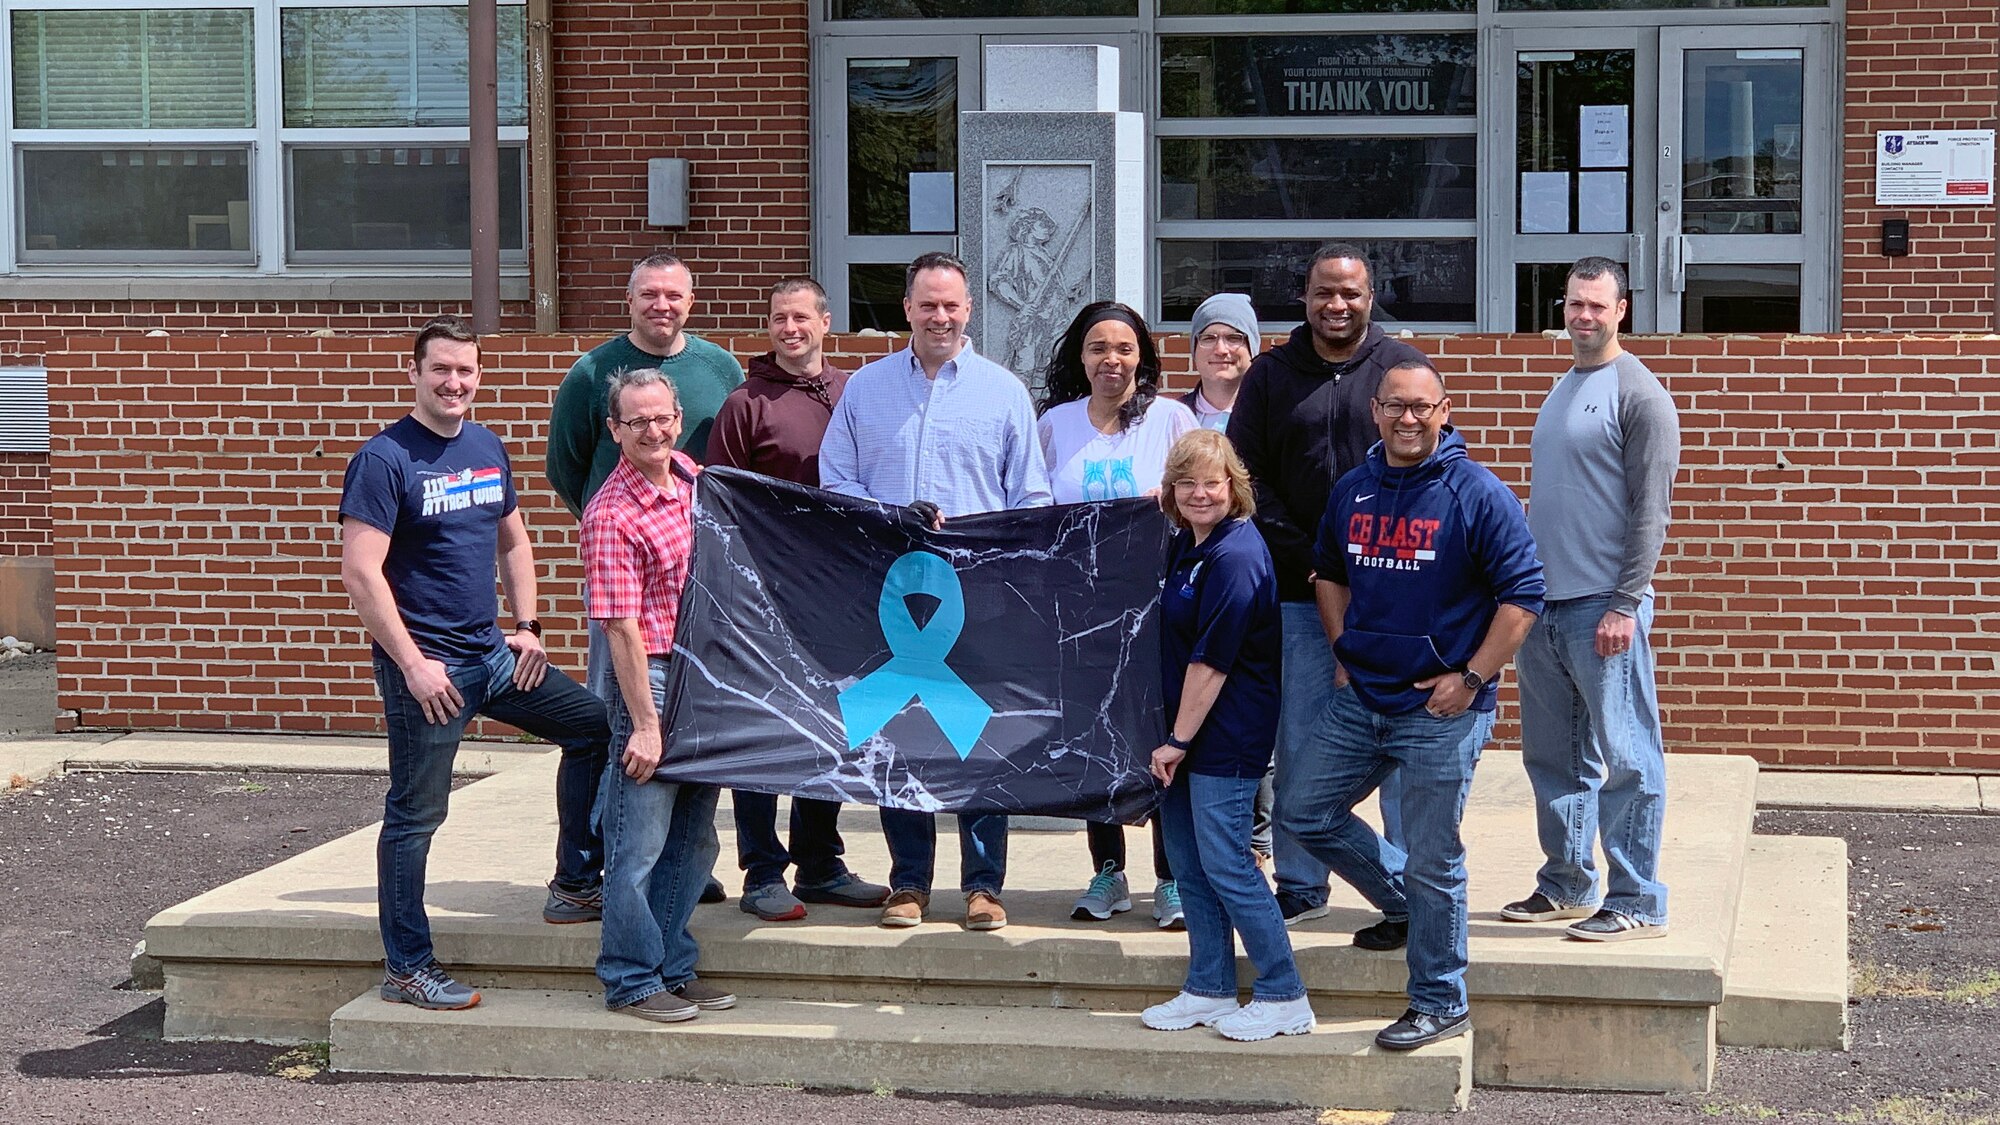 Members of the 111th Attack Wing pose in civilian clothes holding a black banner featuring a teal ribbon in the center.